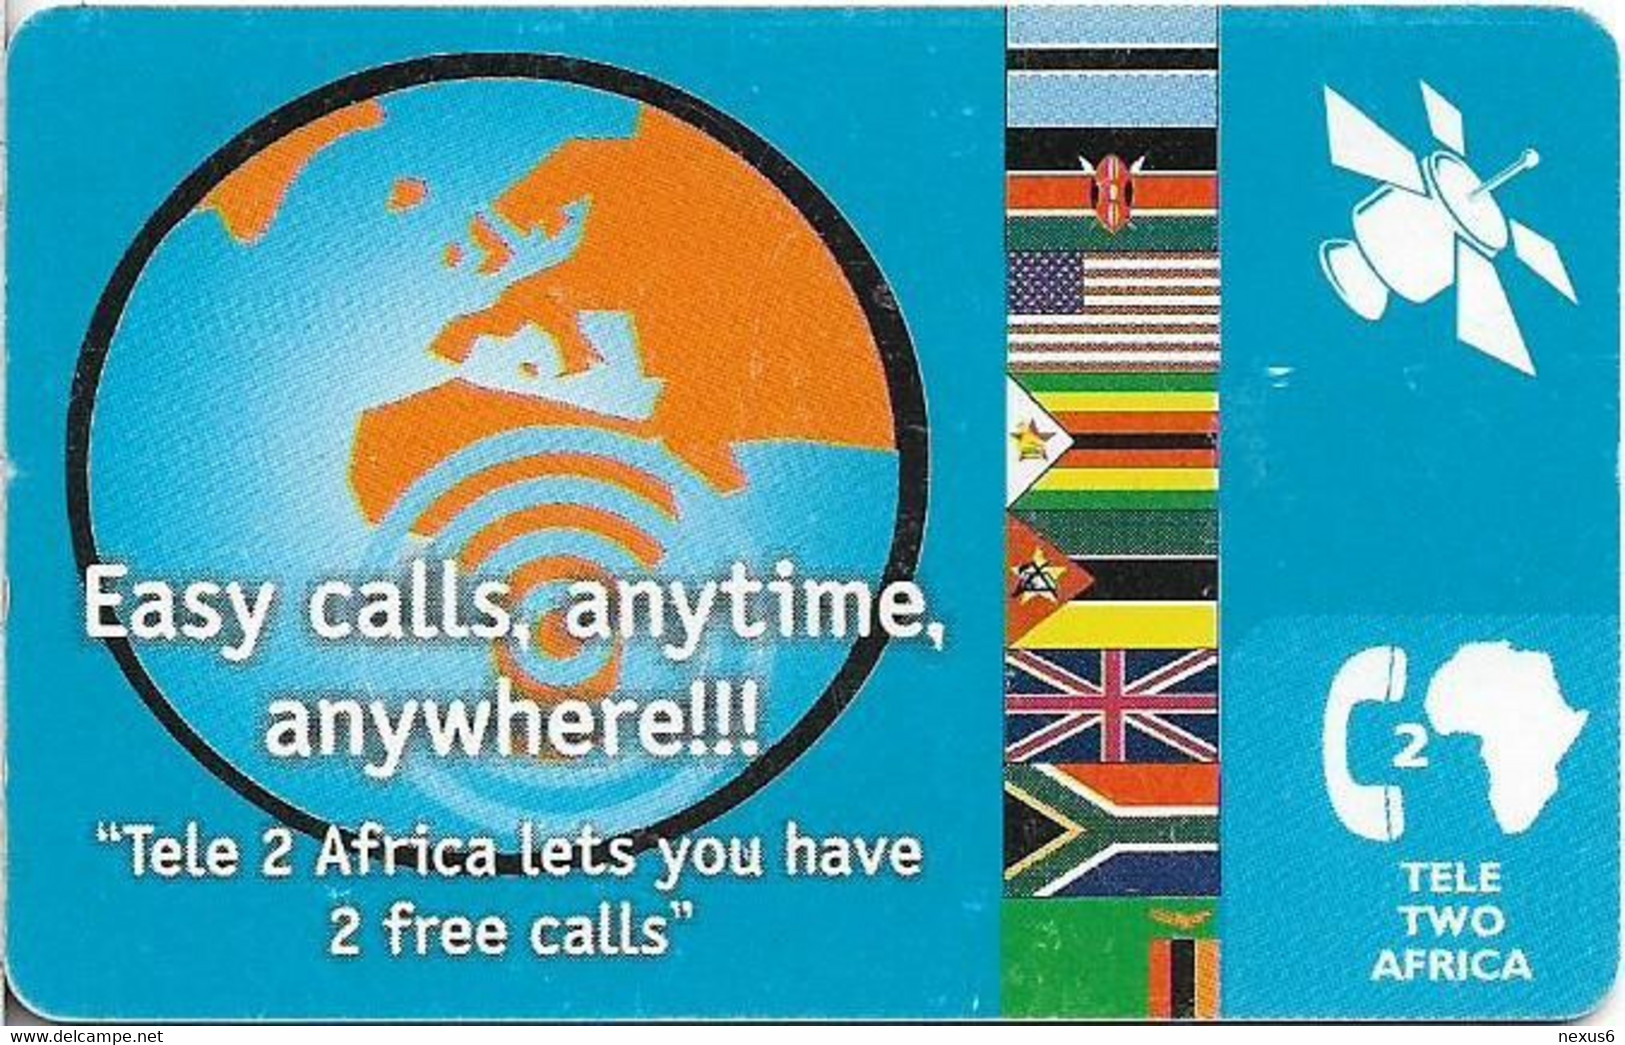 Zambia - Tele Two - Easy Calls, Anytime, Anywhere, Siemens S35, 50Units, Used - Sambia